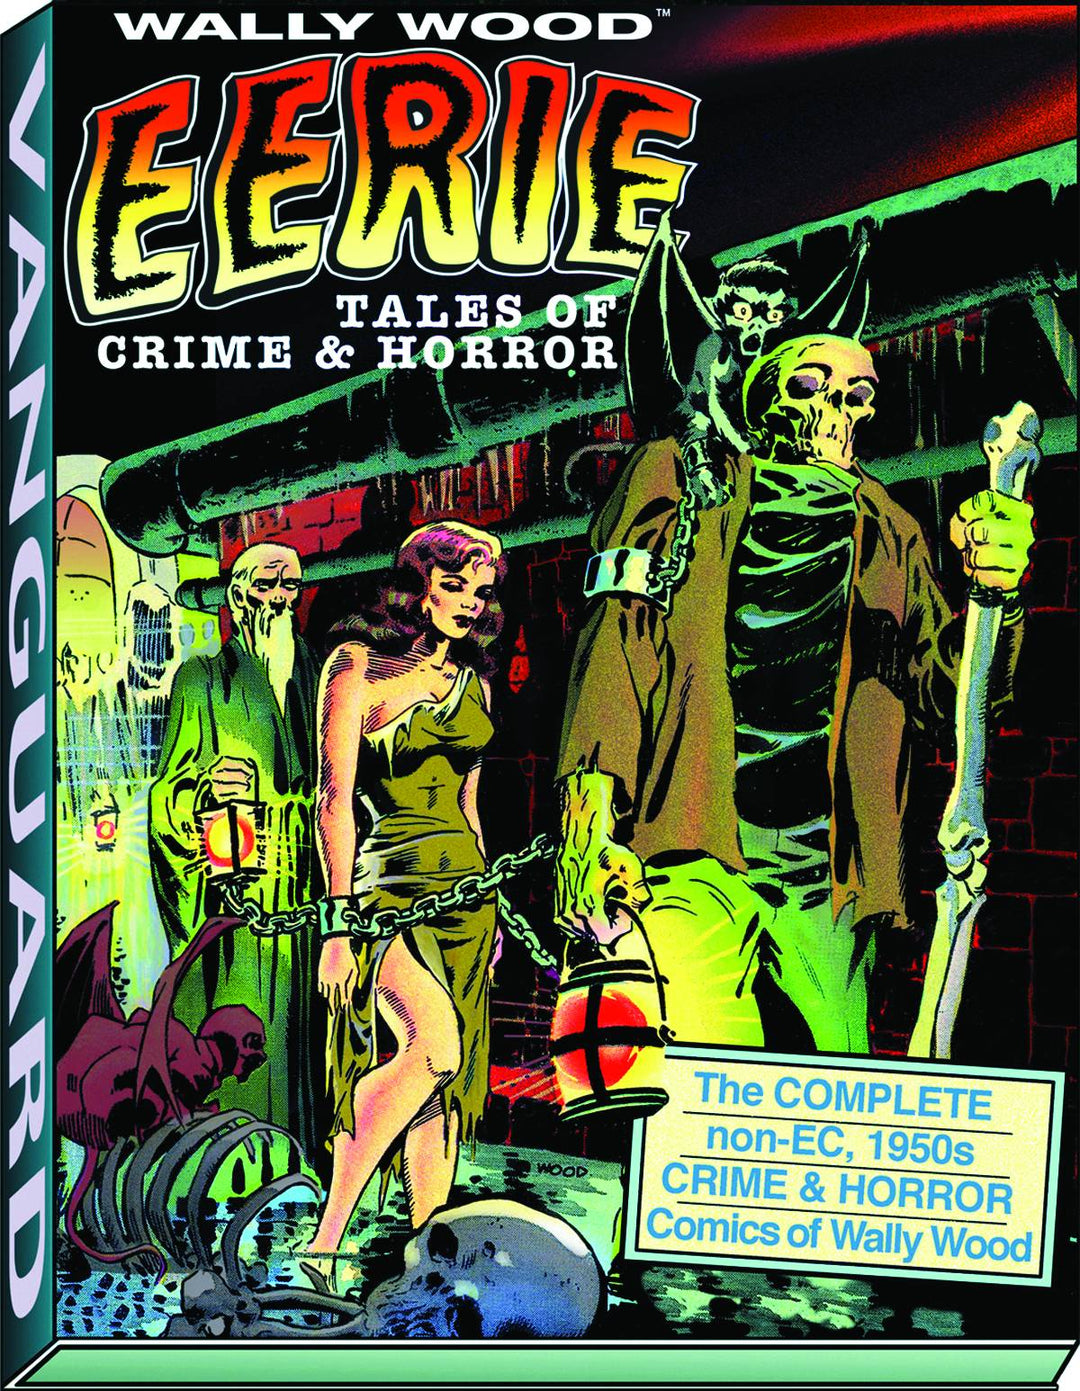 Wally Wood Eerie Tales Of Crime & Horror Softcover OXP-02